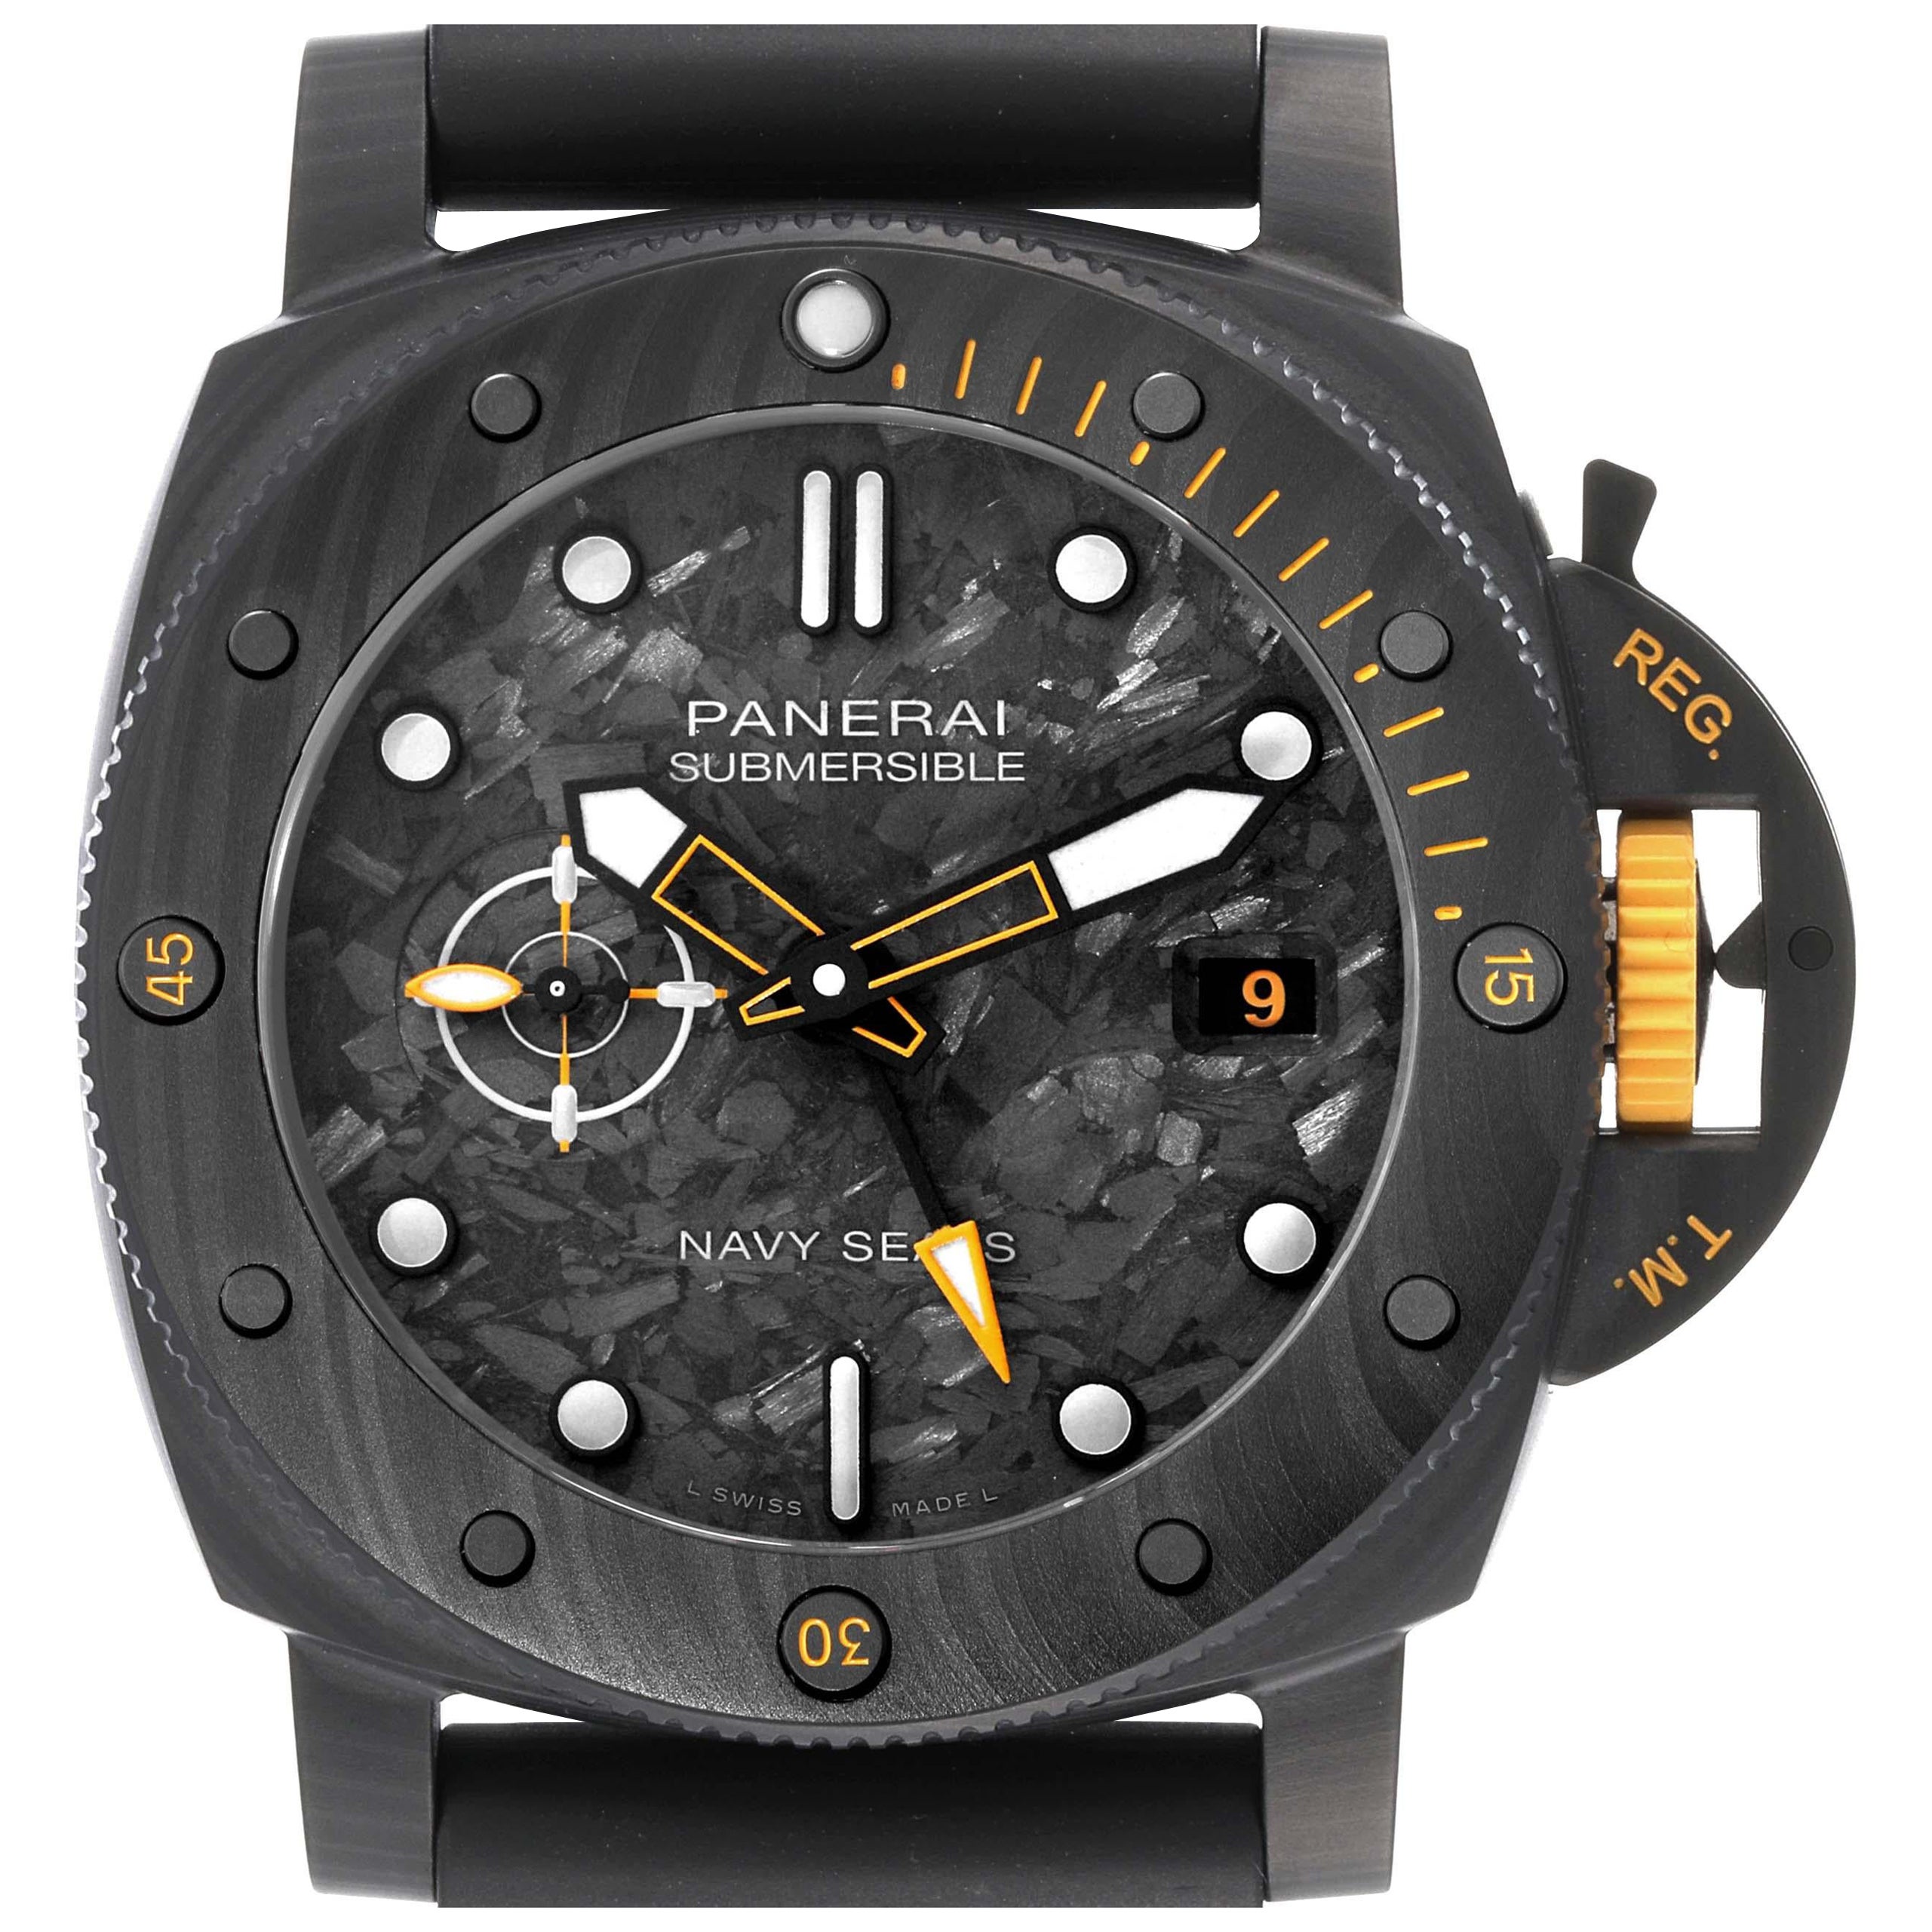 Panerai Submersible GMT Navy Seals LE Carbotech Mens Watch PAM01324 Box Card